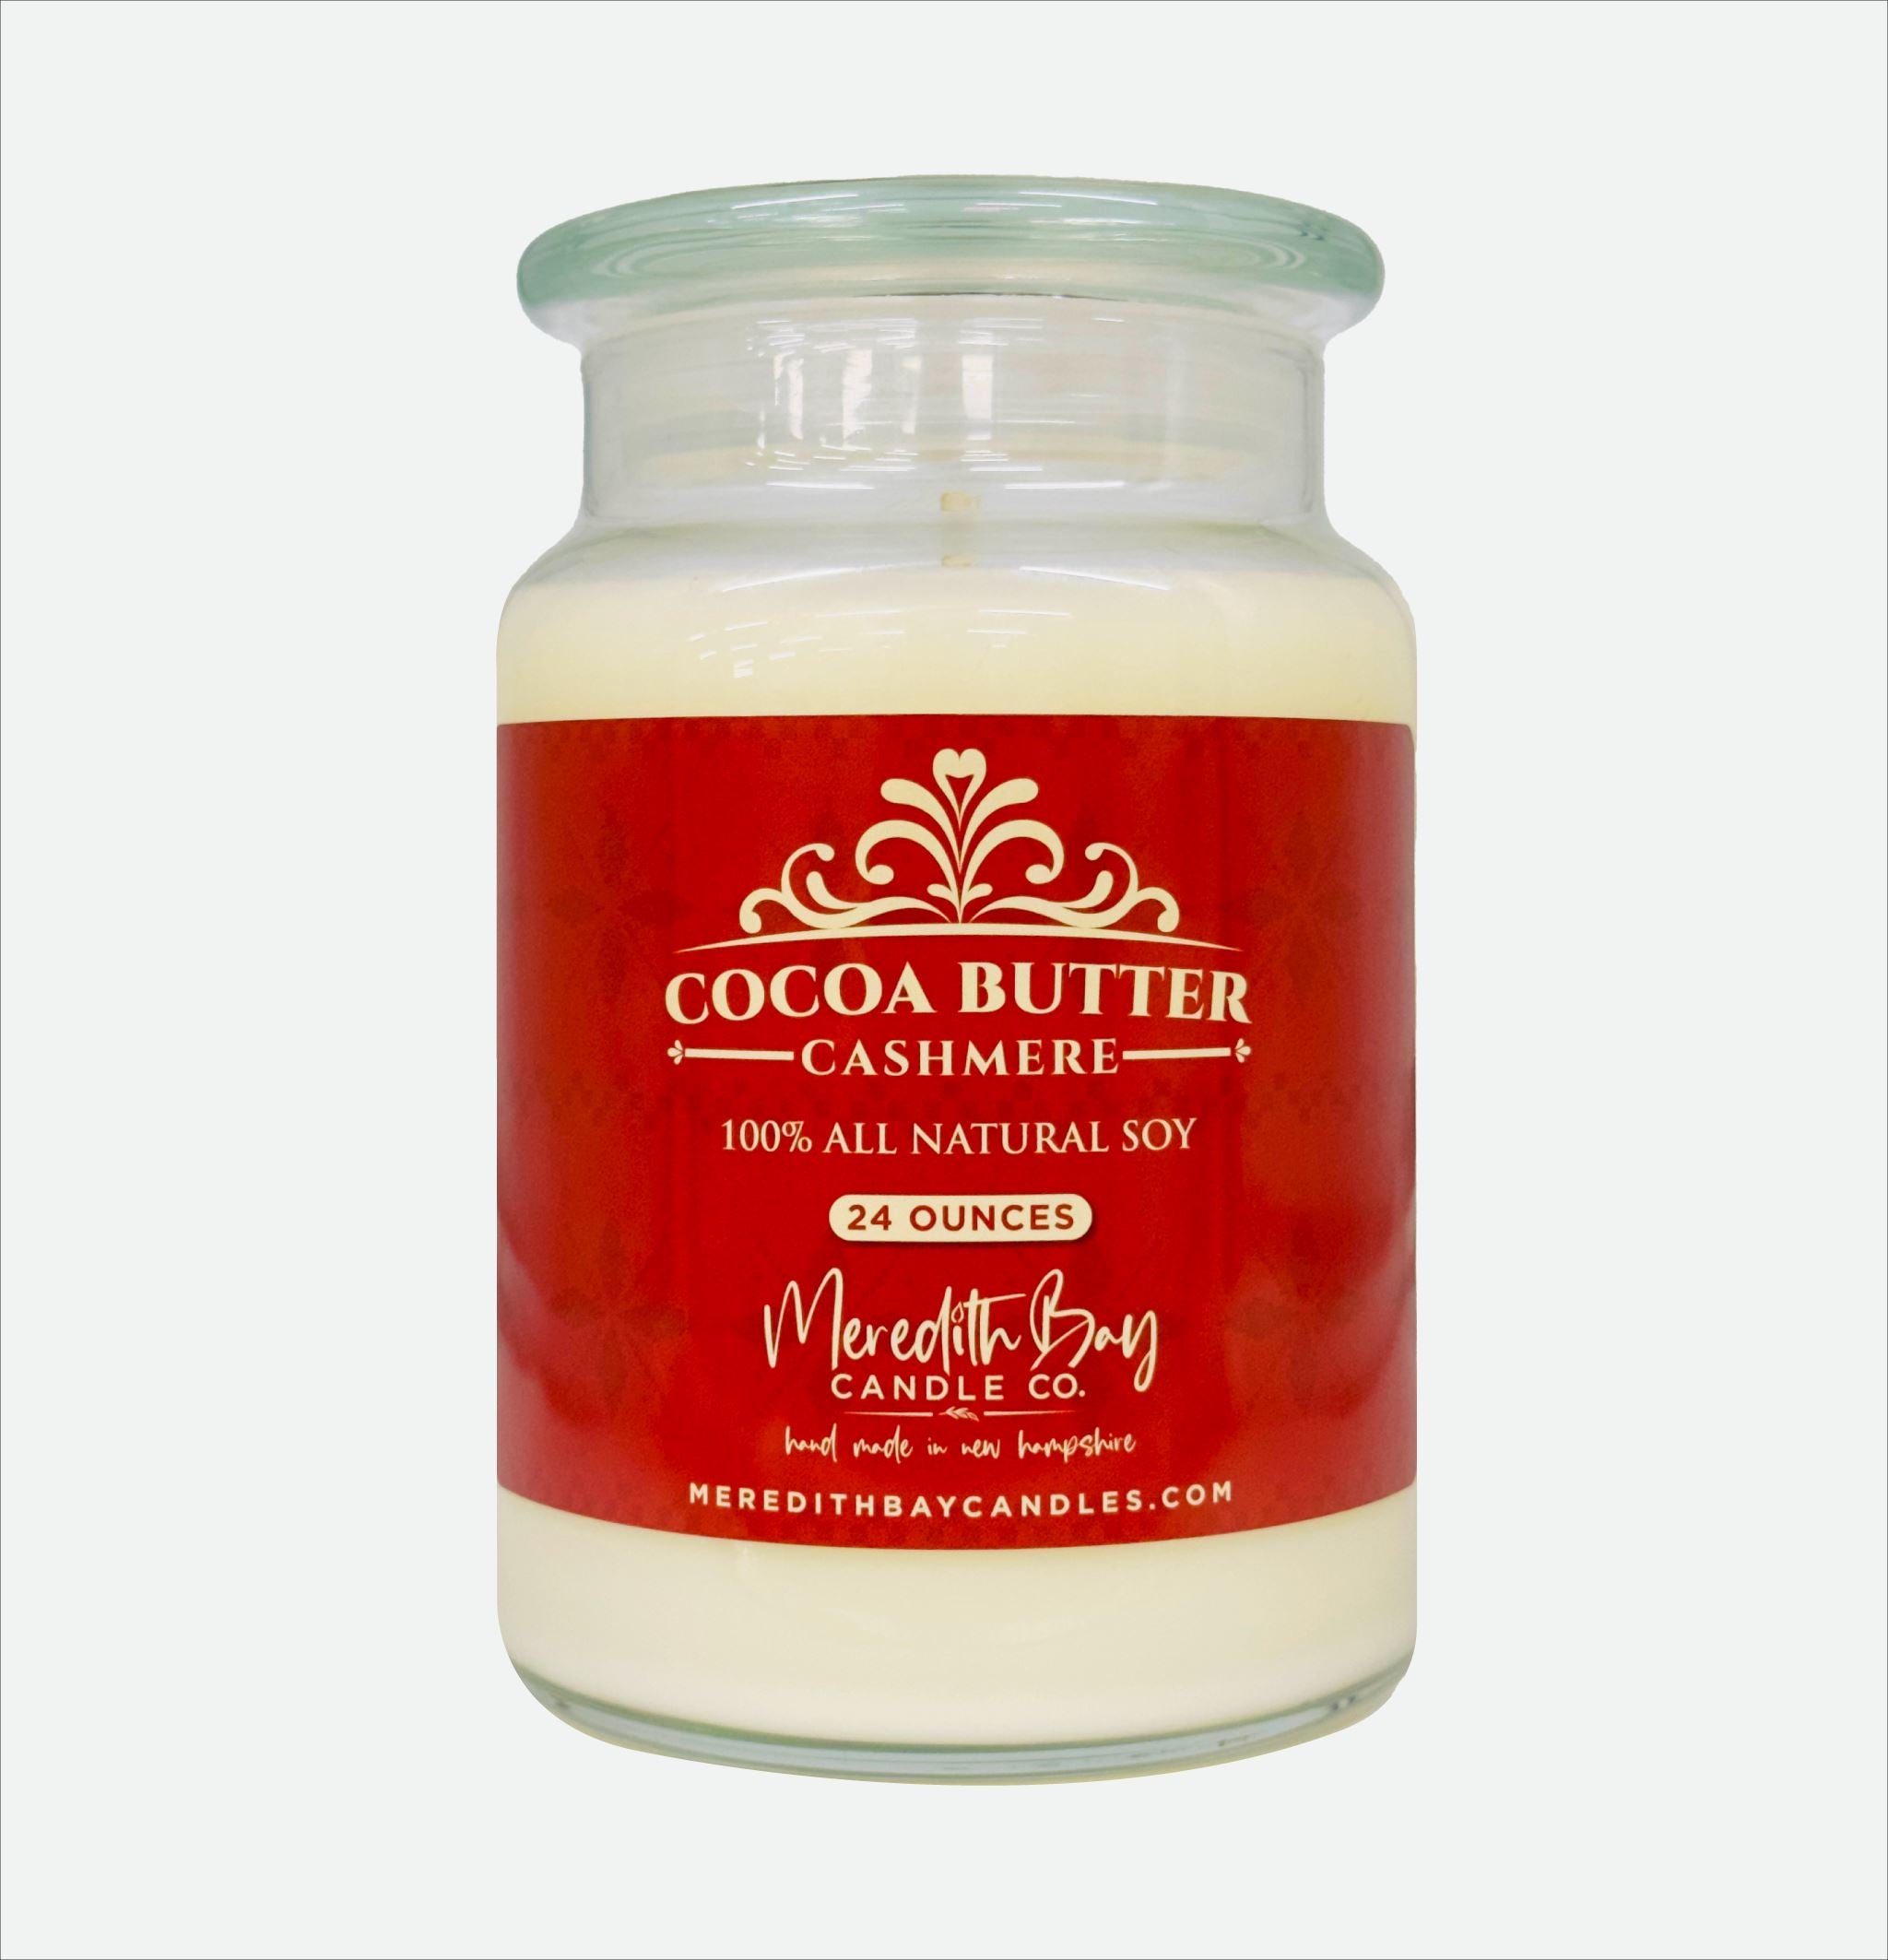 Cocoa Butter Cashmere Soy Candle Meredith Bay Candle Co 24.0 Oz 